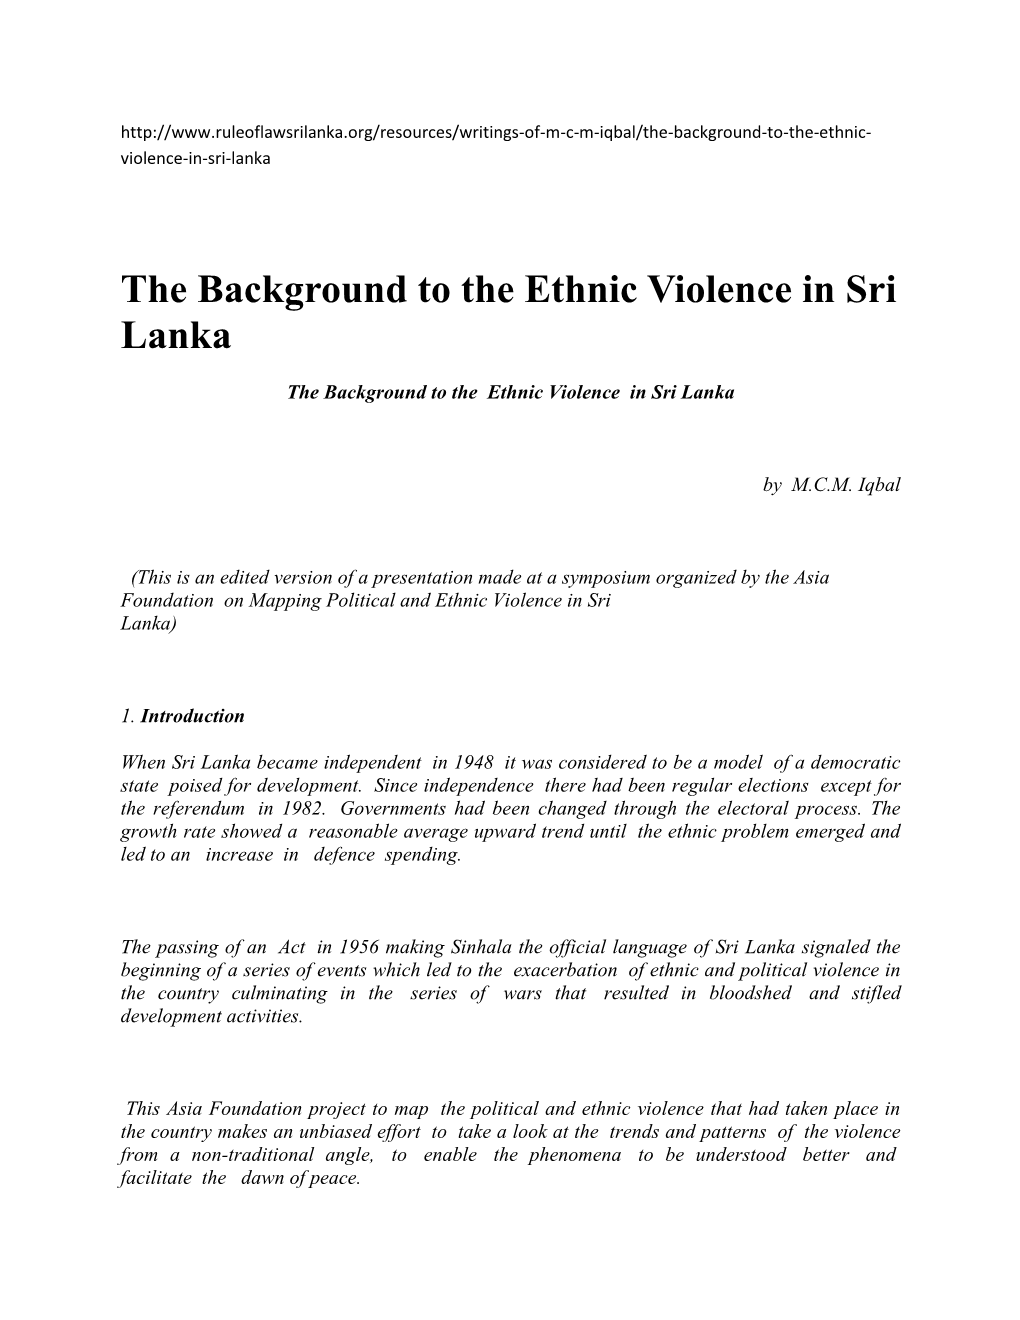 The Background to the Ethnic Violence in Sri Lanka